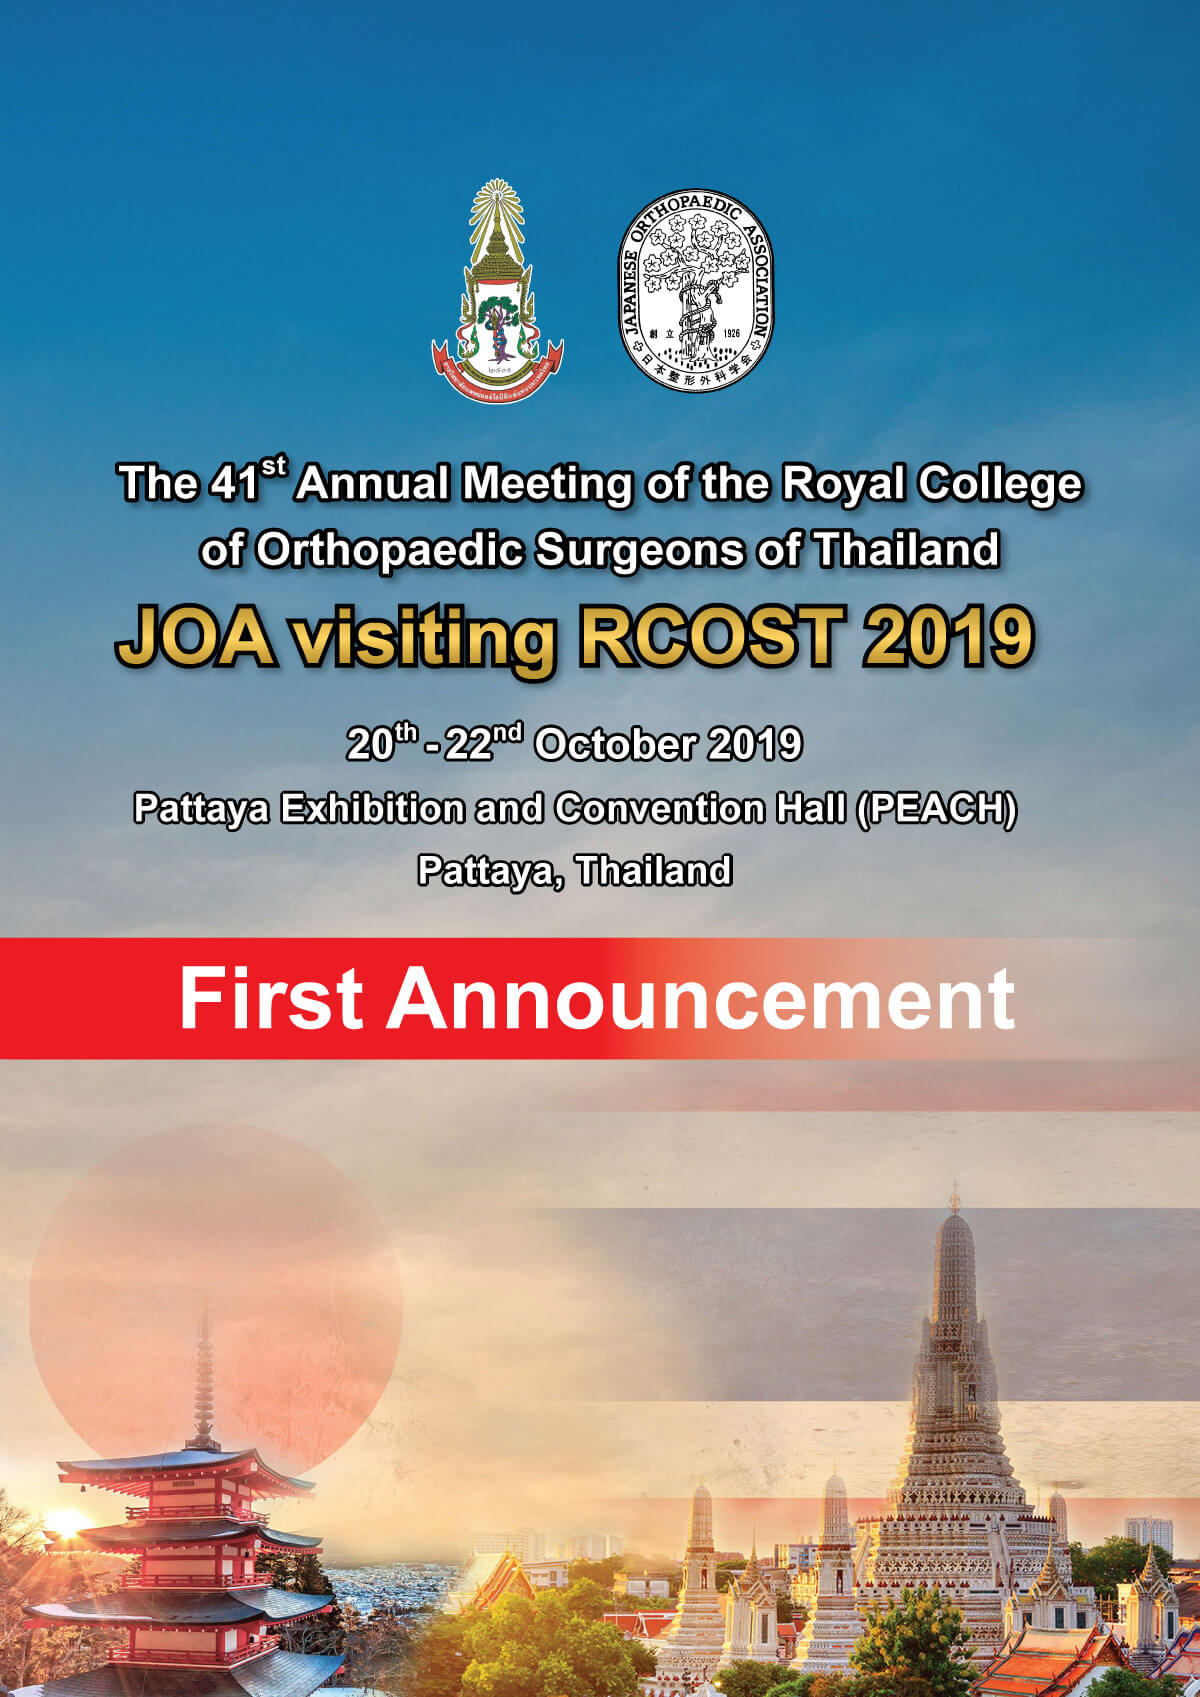 The 41st Annual Meeting of the Royal College of Orthopaedic Surgeons of Thailand